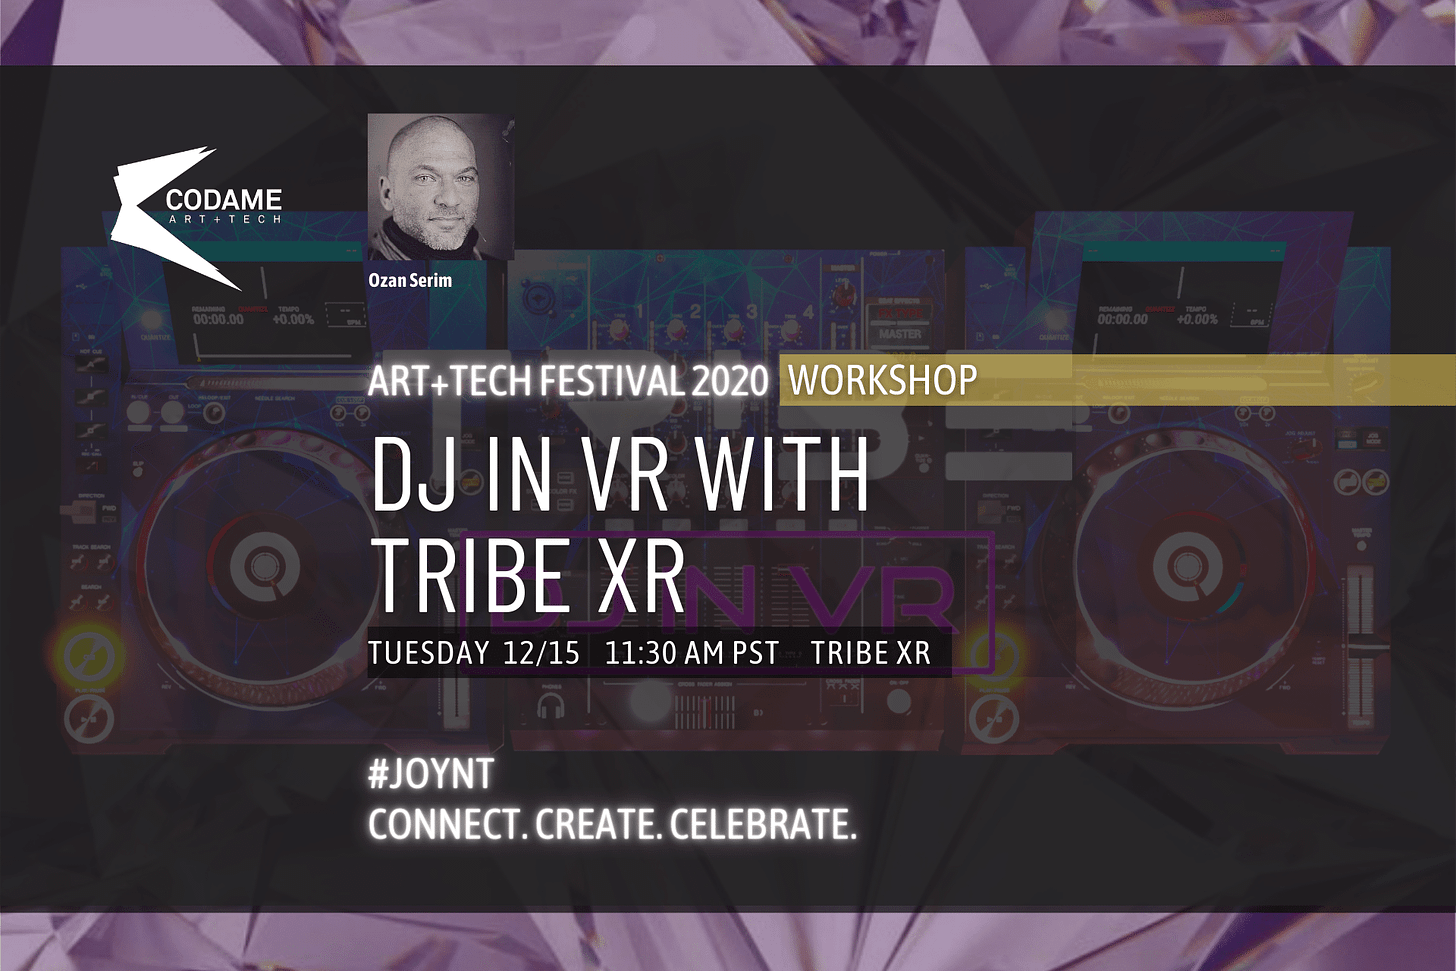 Learn to DJ in VR with Tribe XR